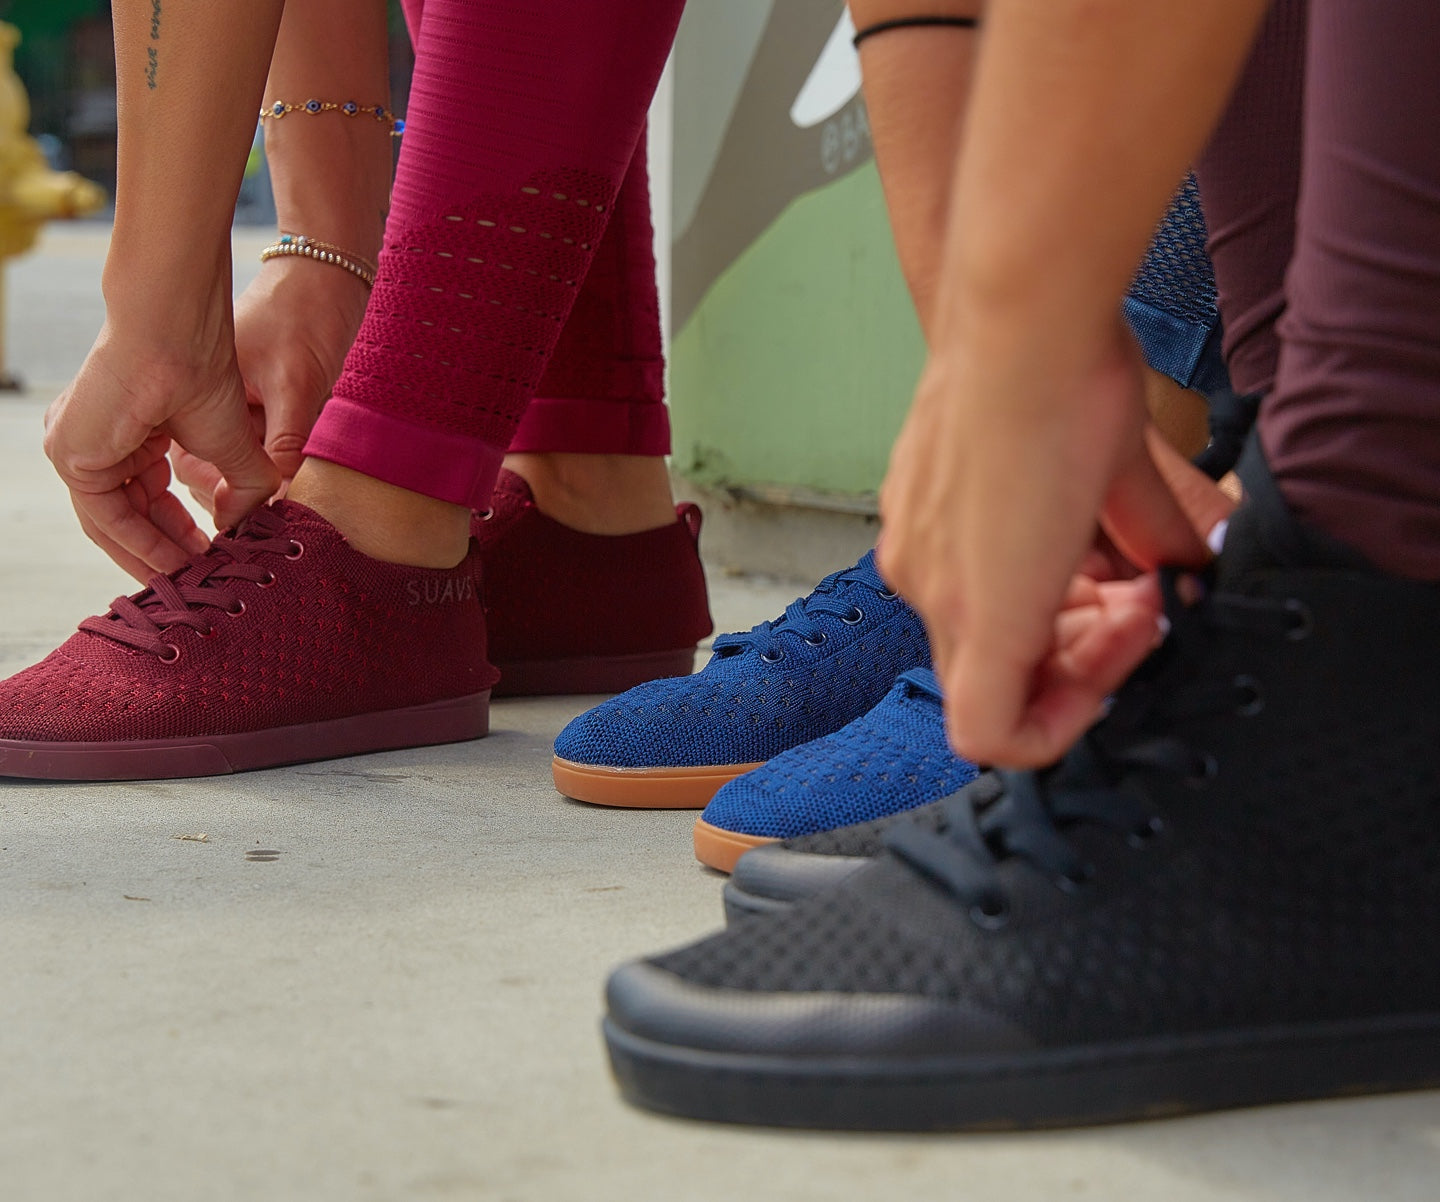 Group of people reaching down to tie their SUAVS shoes.